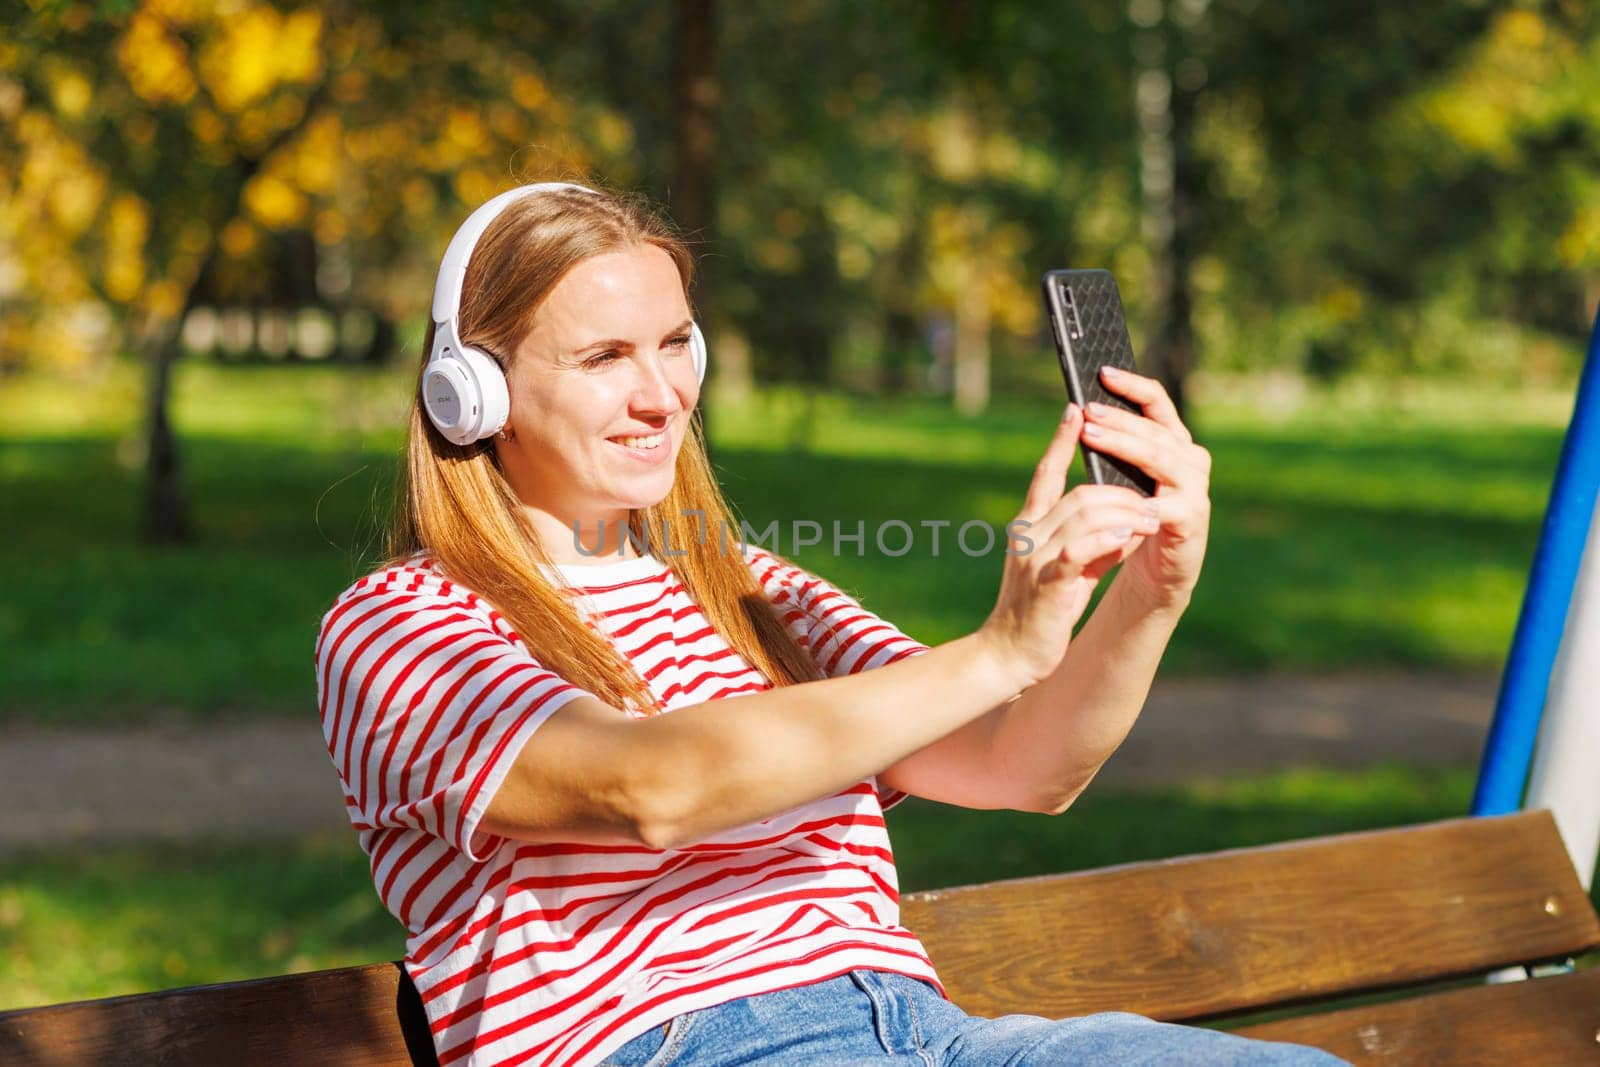 A woman wearing headphones listening to music while sitting on a bench by andreyz